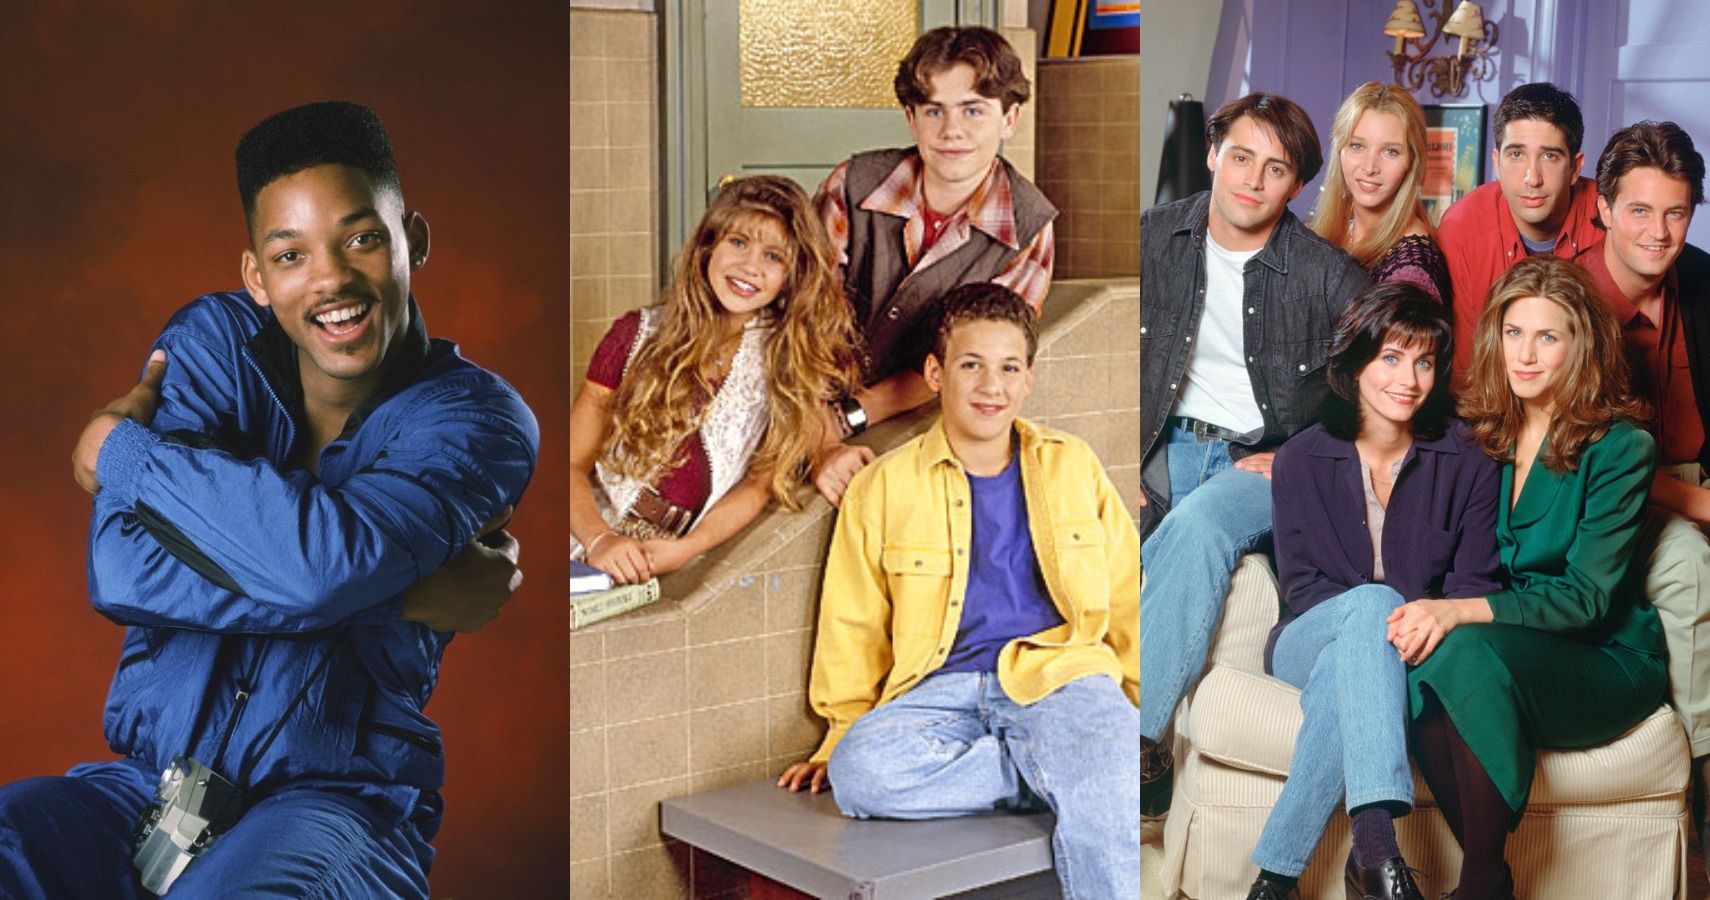 Of the 90s sitcoms Underrated '90s